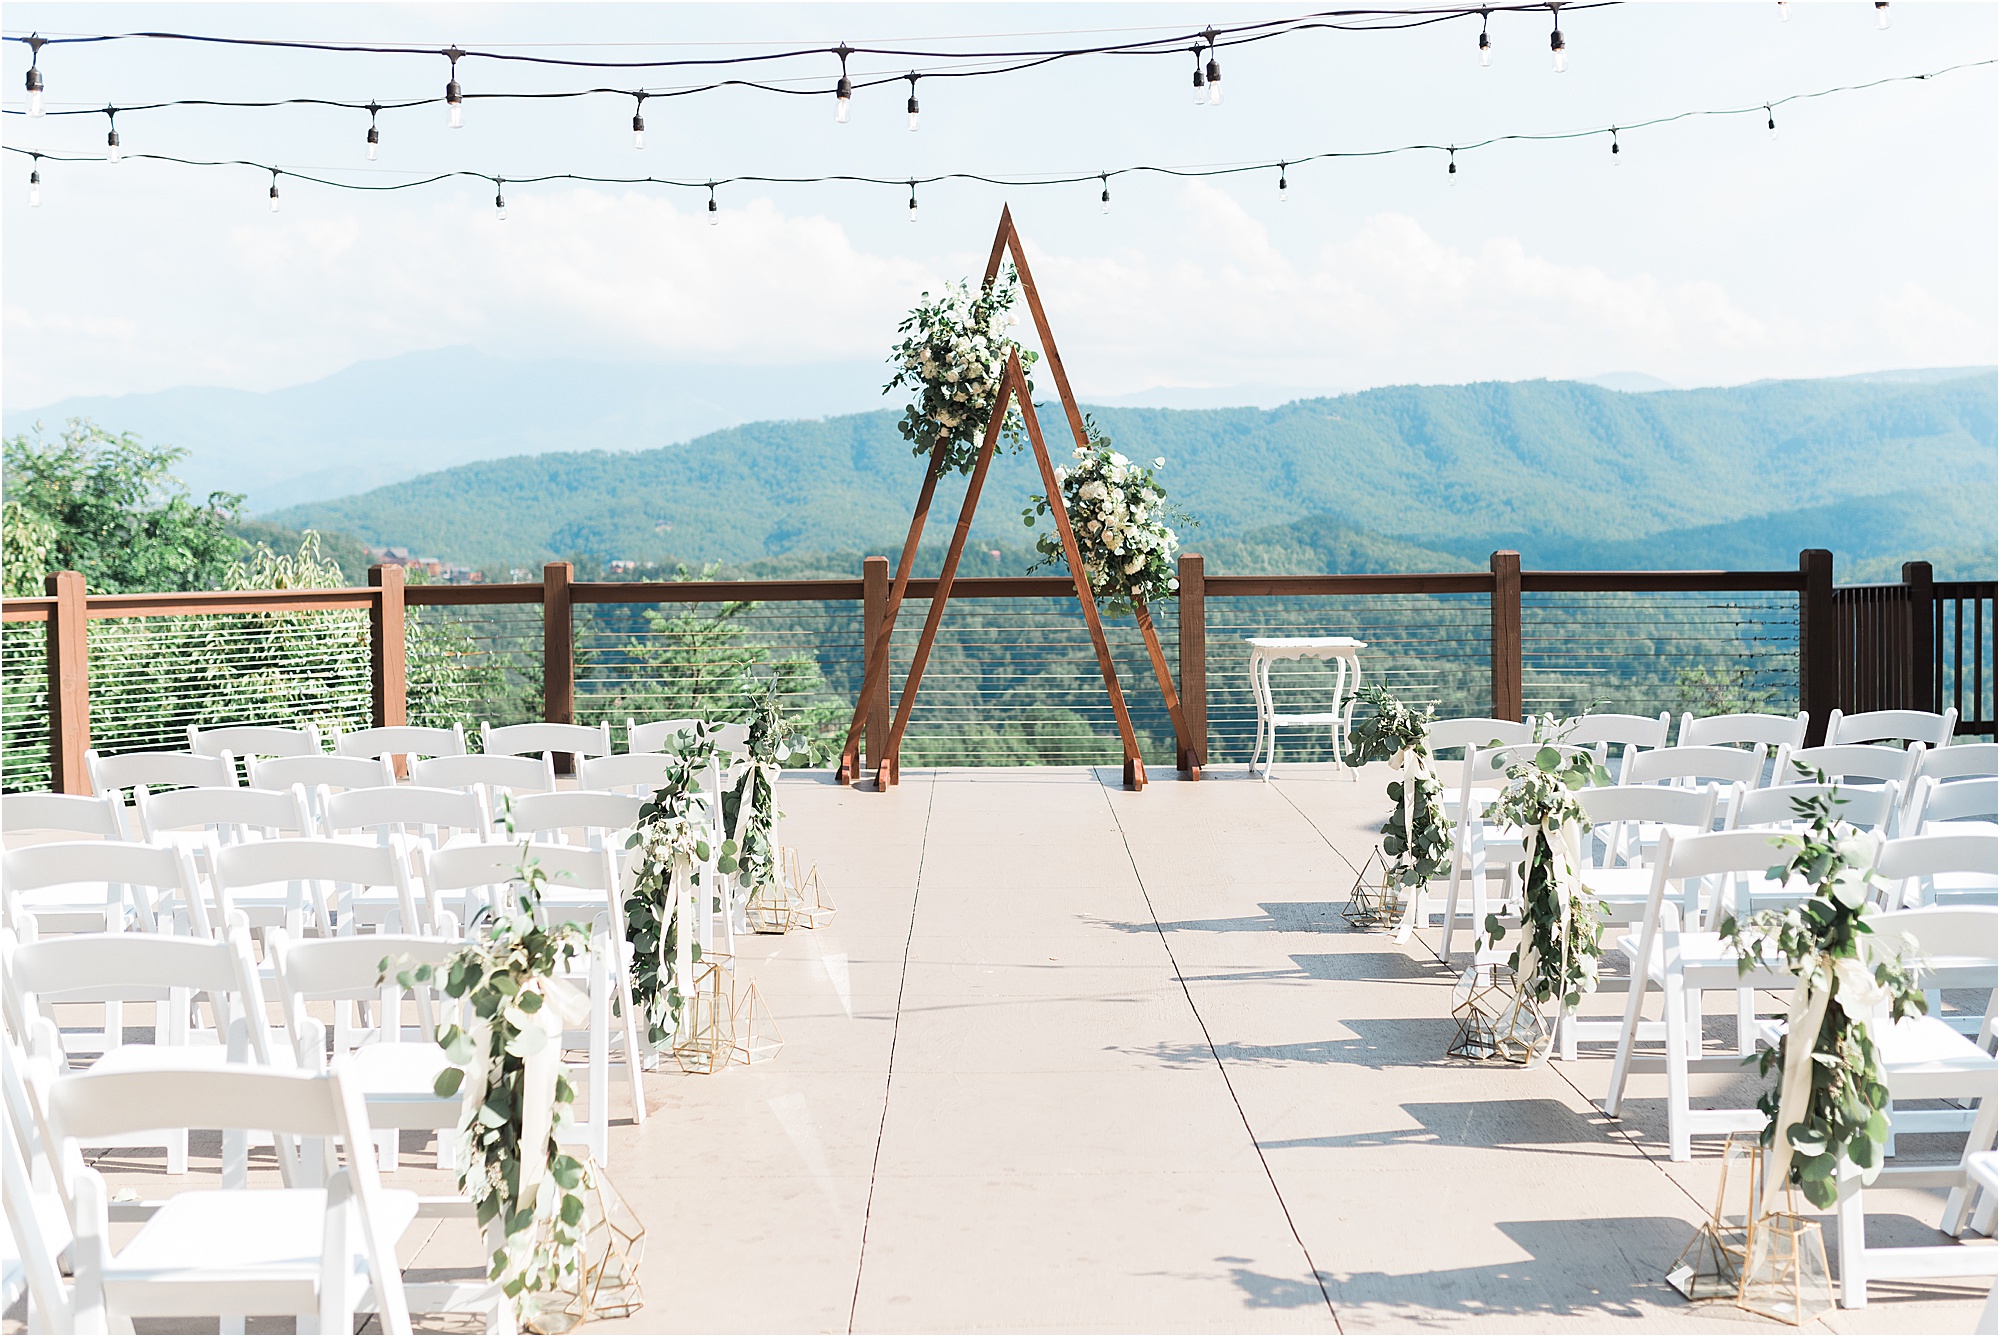 Triangle arbor ceremony backdrop overlooking mountains